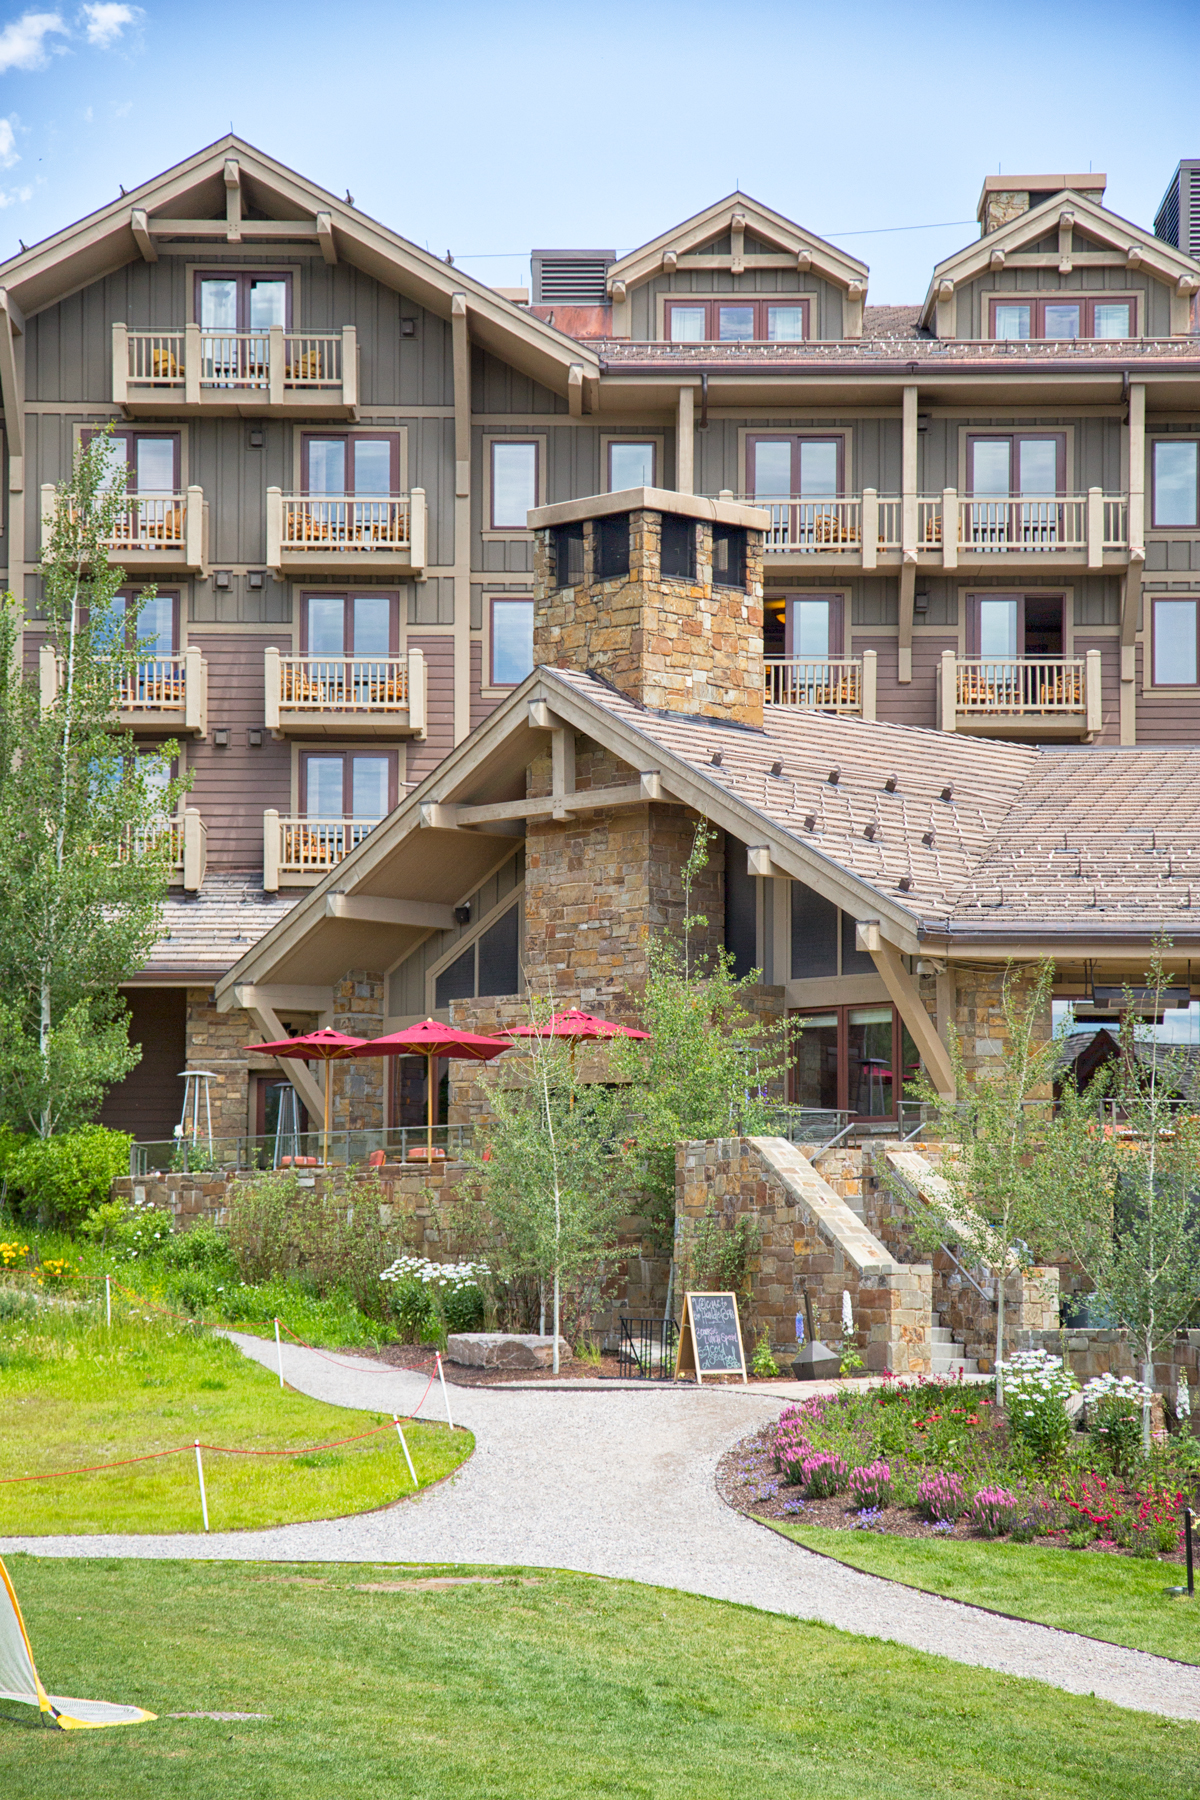 The Four Seasons Resort in Jackson Hole, Wyoming